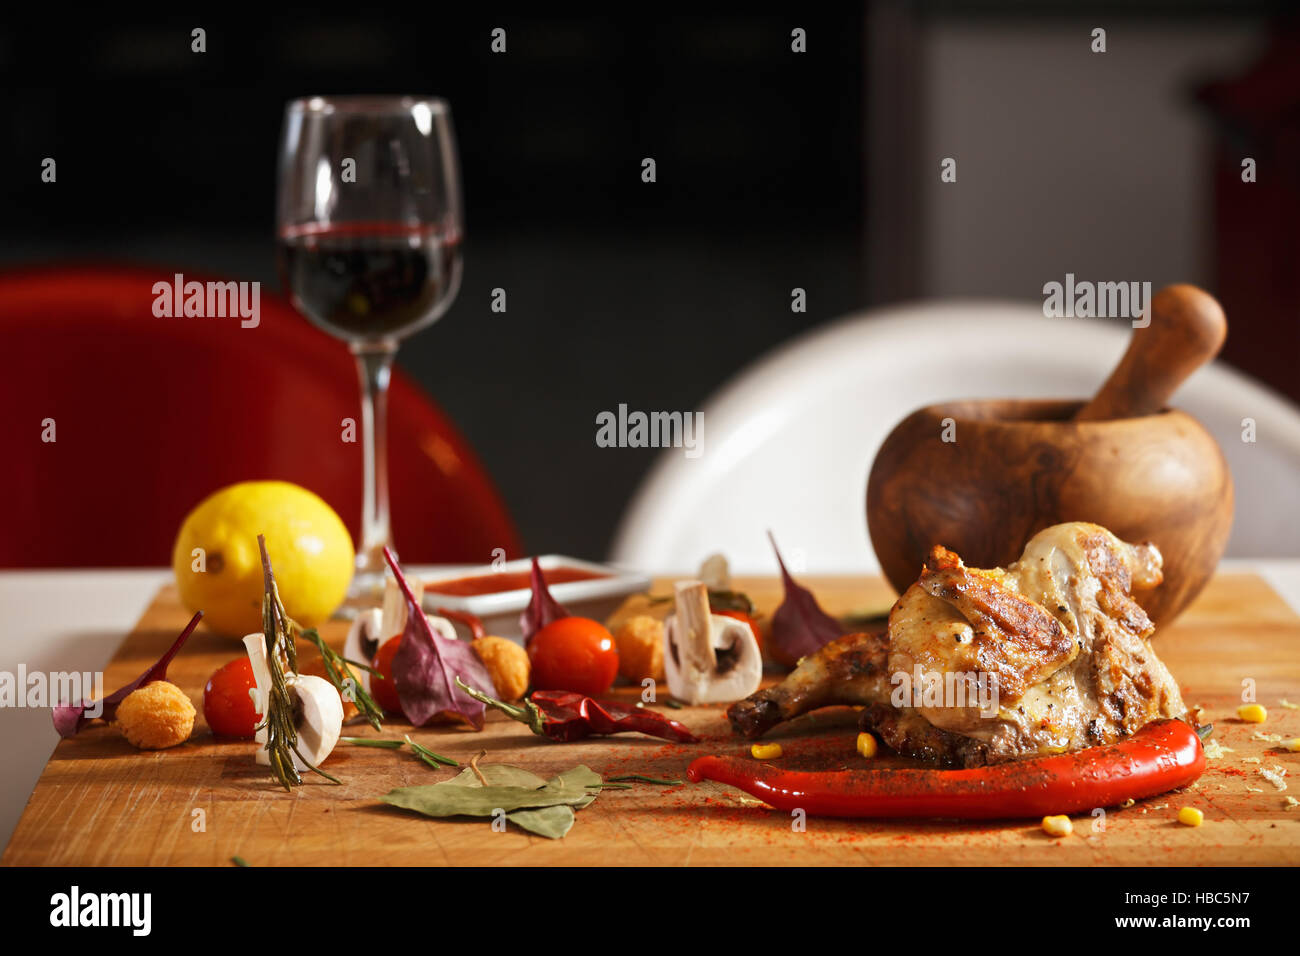 Roasted chicken with vegetables on table Stock Photo